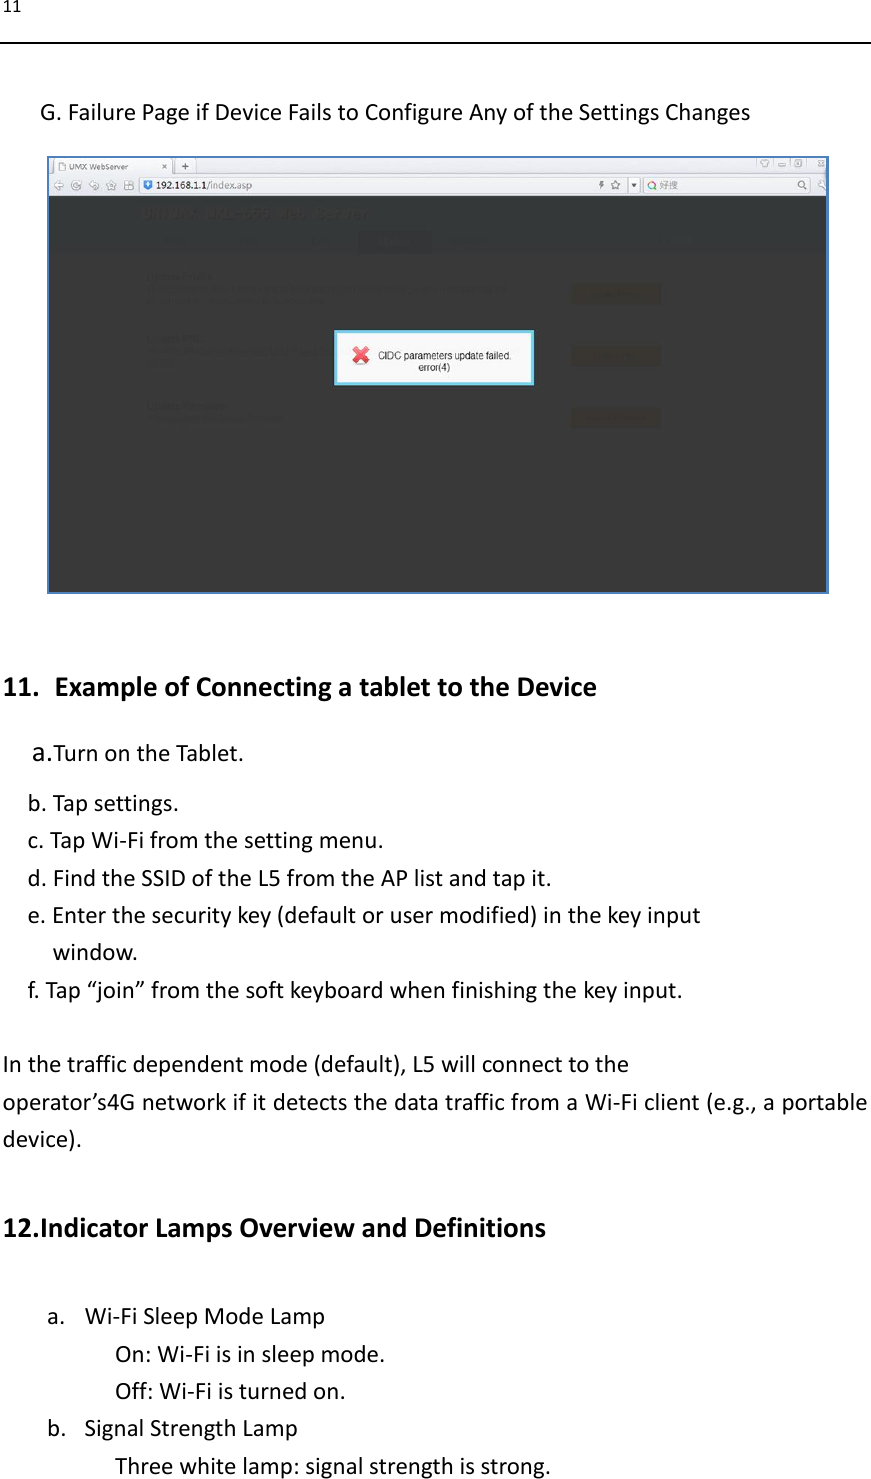 11   G. Failure Page if Device Fails to Configure Any of the Settings Changes                 11.   Example of Connecting a tablet to the Device a.Turn on the Tablet. b. Tap settings. c. Tap Wi-Fi from the setting menu. d. Find the SSID of the L5 from the AP list and tap it.   e. Enter the security key (default or user modified) in the key input   window. f. Tap “join” from the soft keyboard when finishing the key input.  In the traffic dependent mode (default), L5 will connect to the operator’s4G network if it detects the data traffic from a Wi-Fi client (e.g., a portable device).    12. Indicator Lamps Overview and Definitions  a. Wi-Fi Sleep Mode Lamp On: Wi-Fi is in sleep mode. Off: Wi-Fi is turned on. b. Signal Strength Lamp Three white lamp: signal strength is strong. 